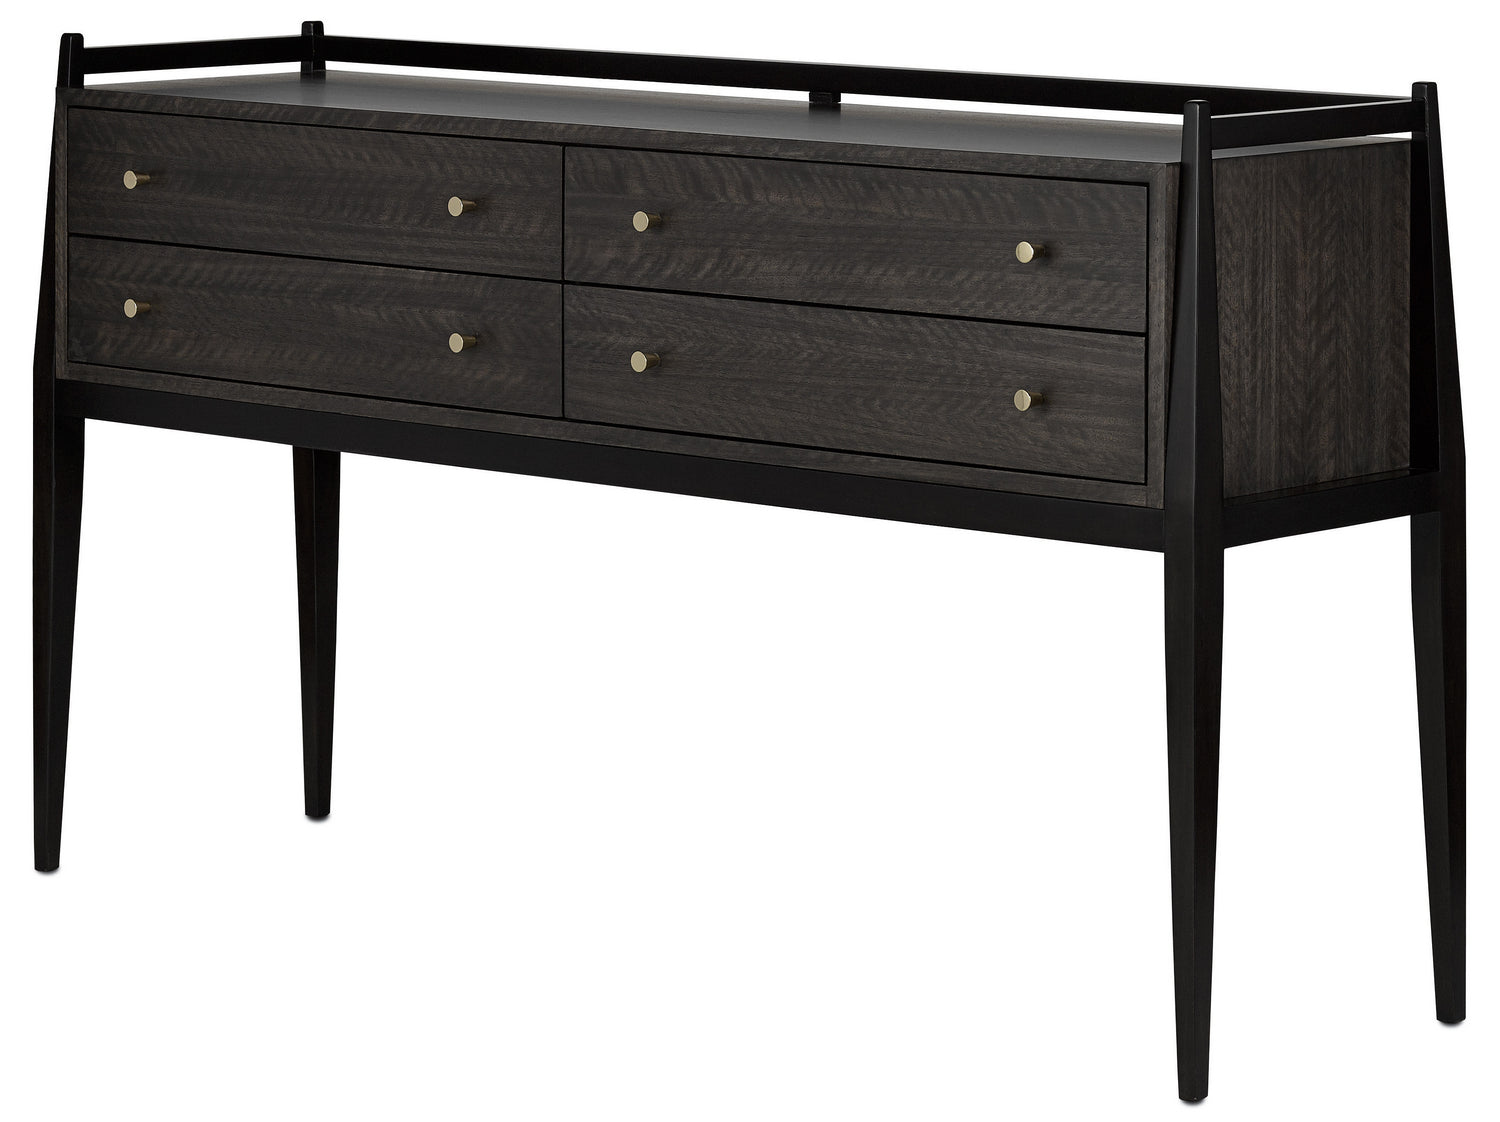 Currey and Company - Console Table - Selig - Dark Mink/Riverstone Gray/Polished Brass- Union Lighting Luminaires Decor